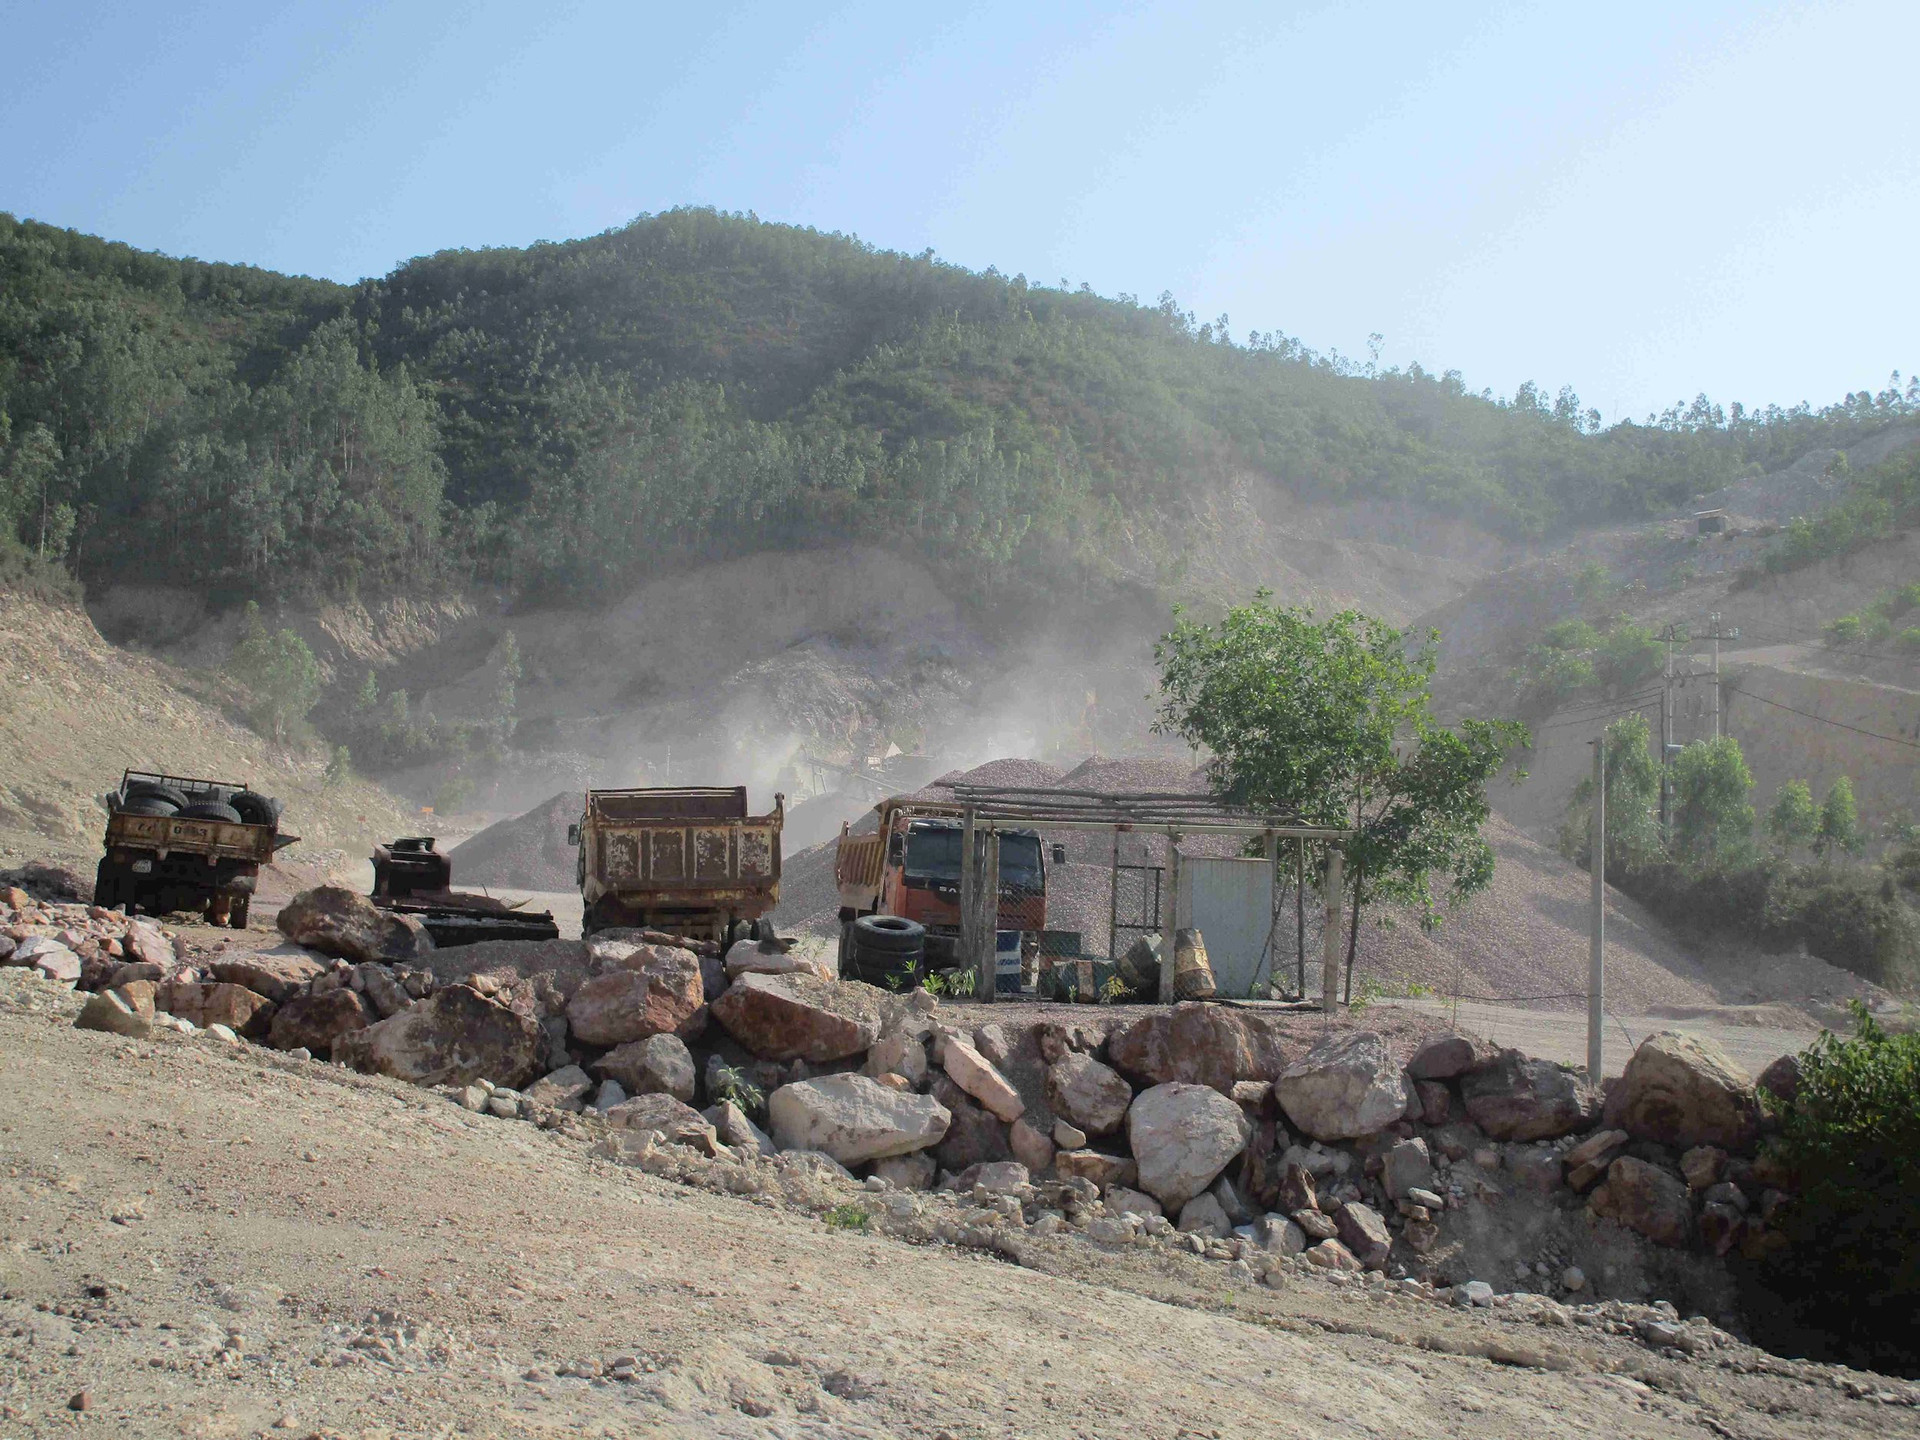 Responsibility for protection of unextracted minerals of licensed mining entities in Vietnam